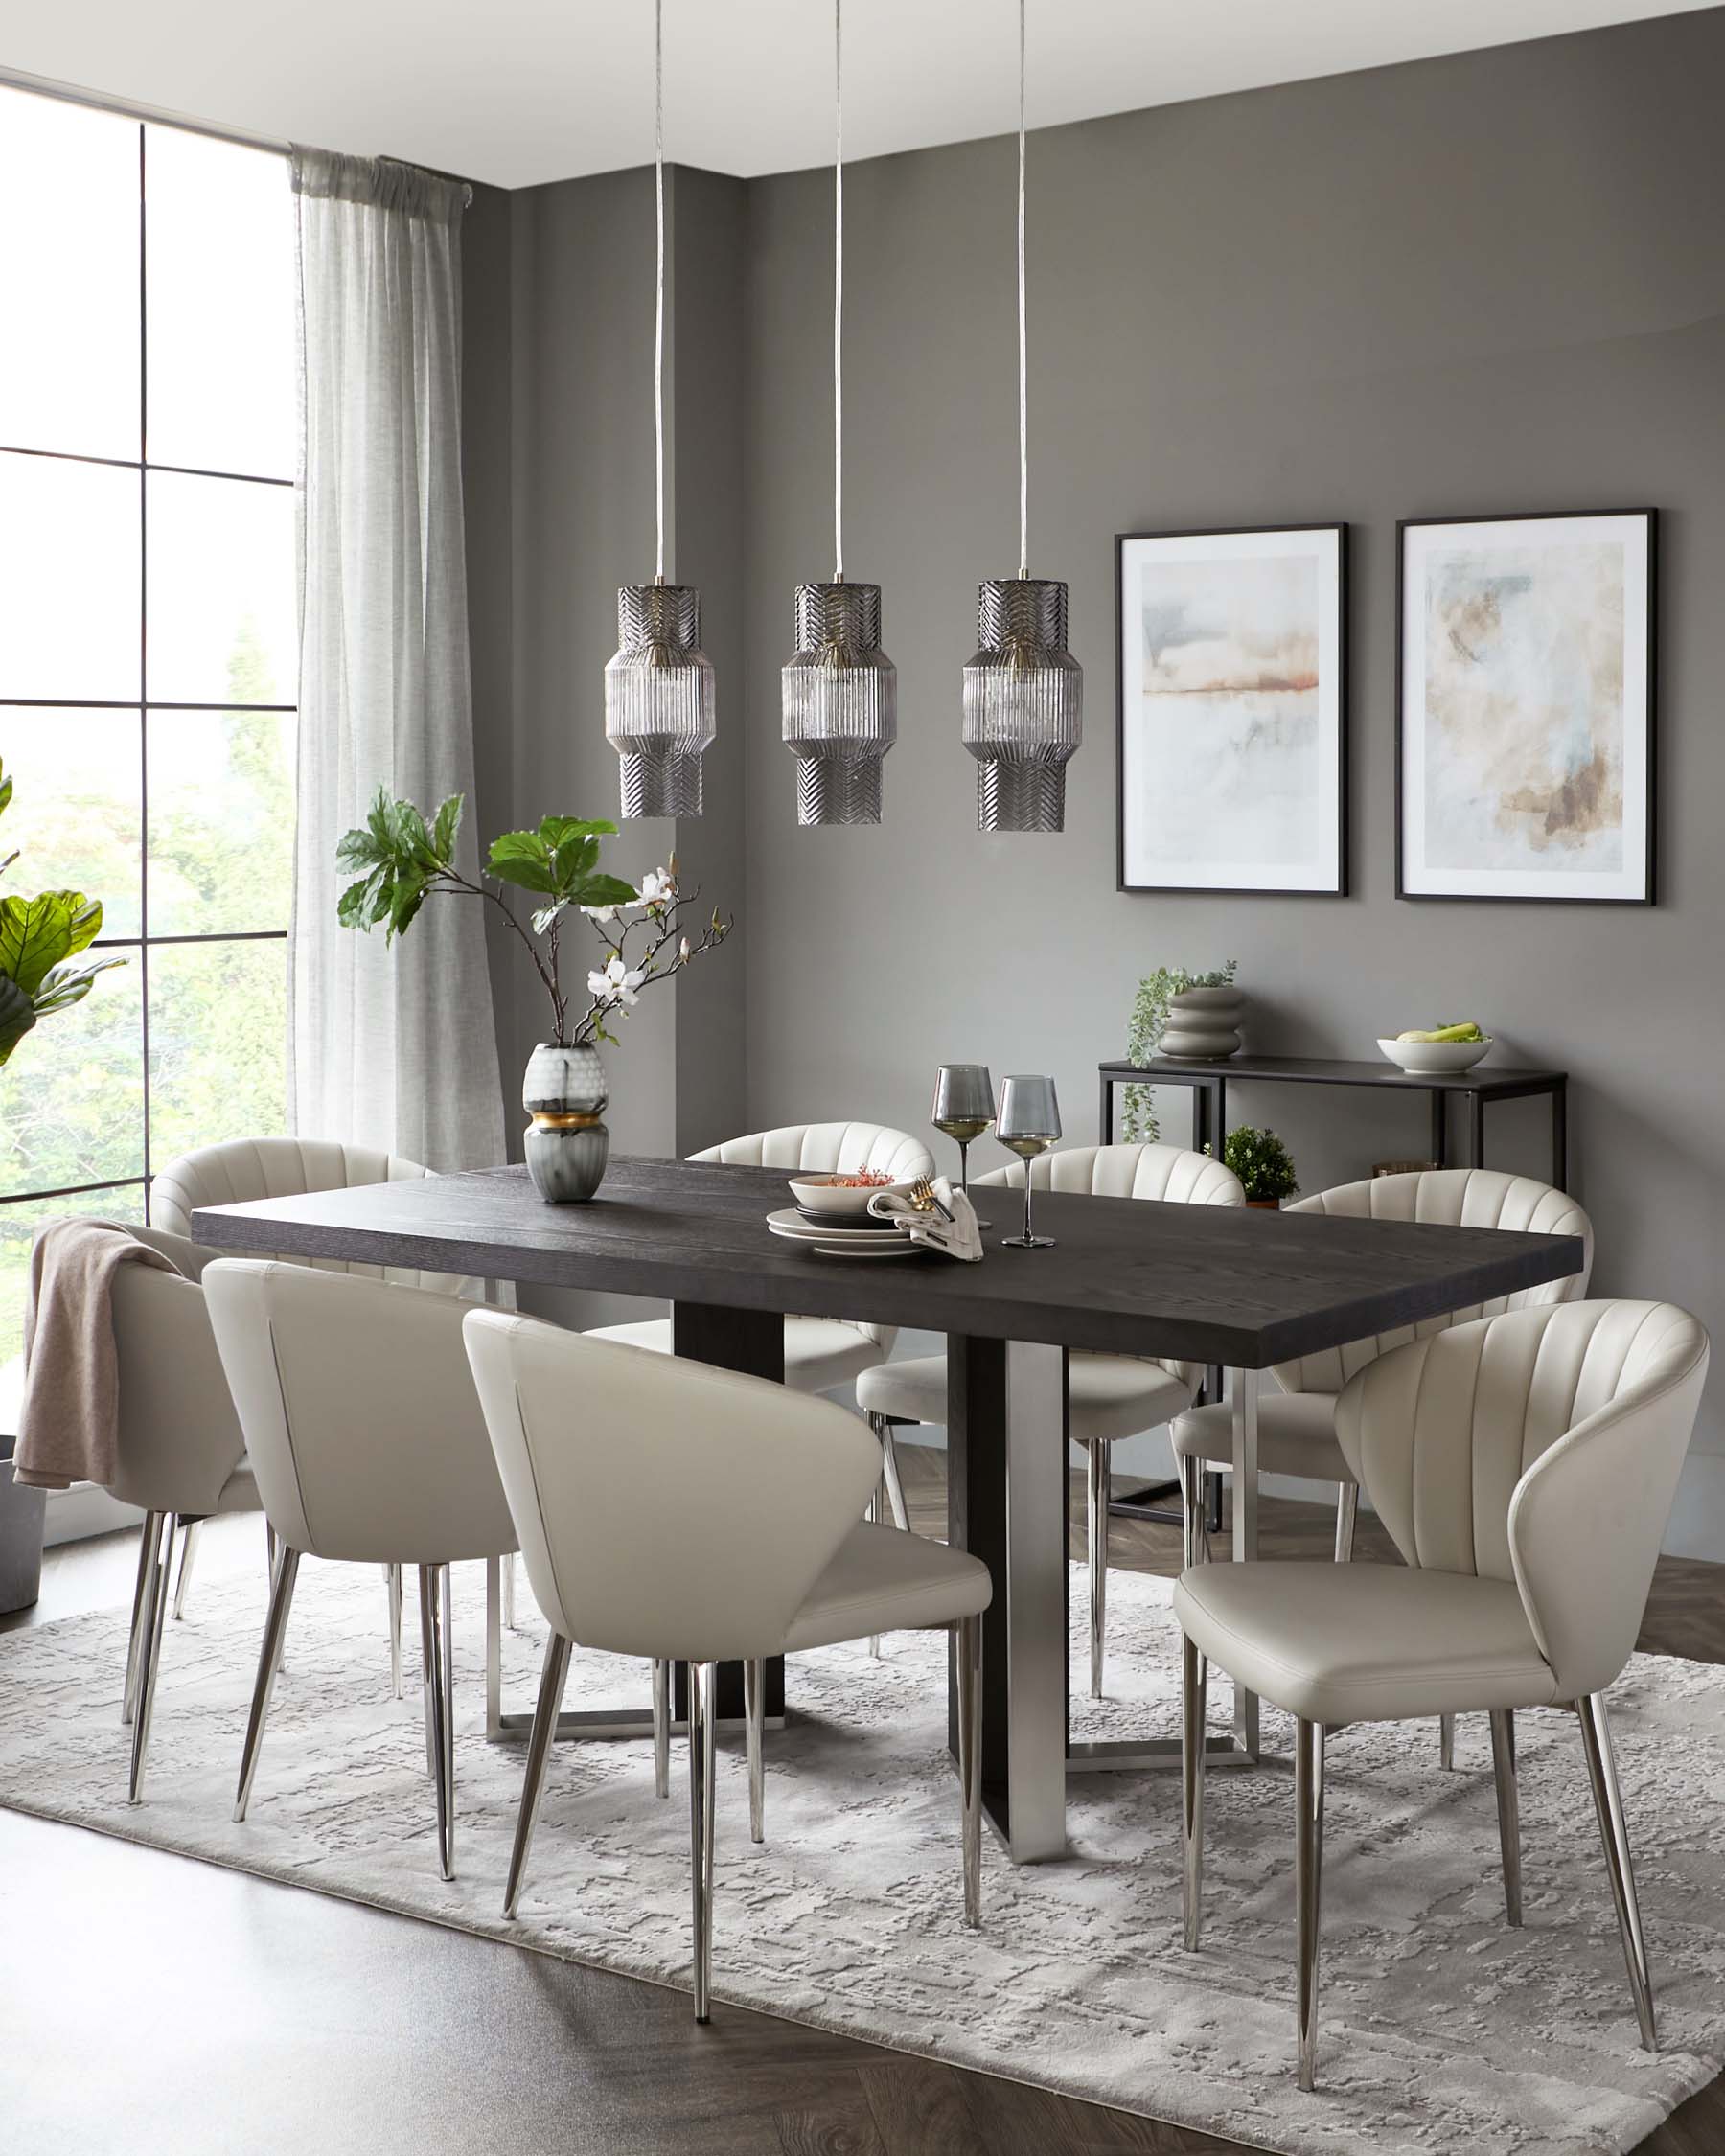 statement-style-dining